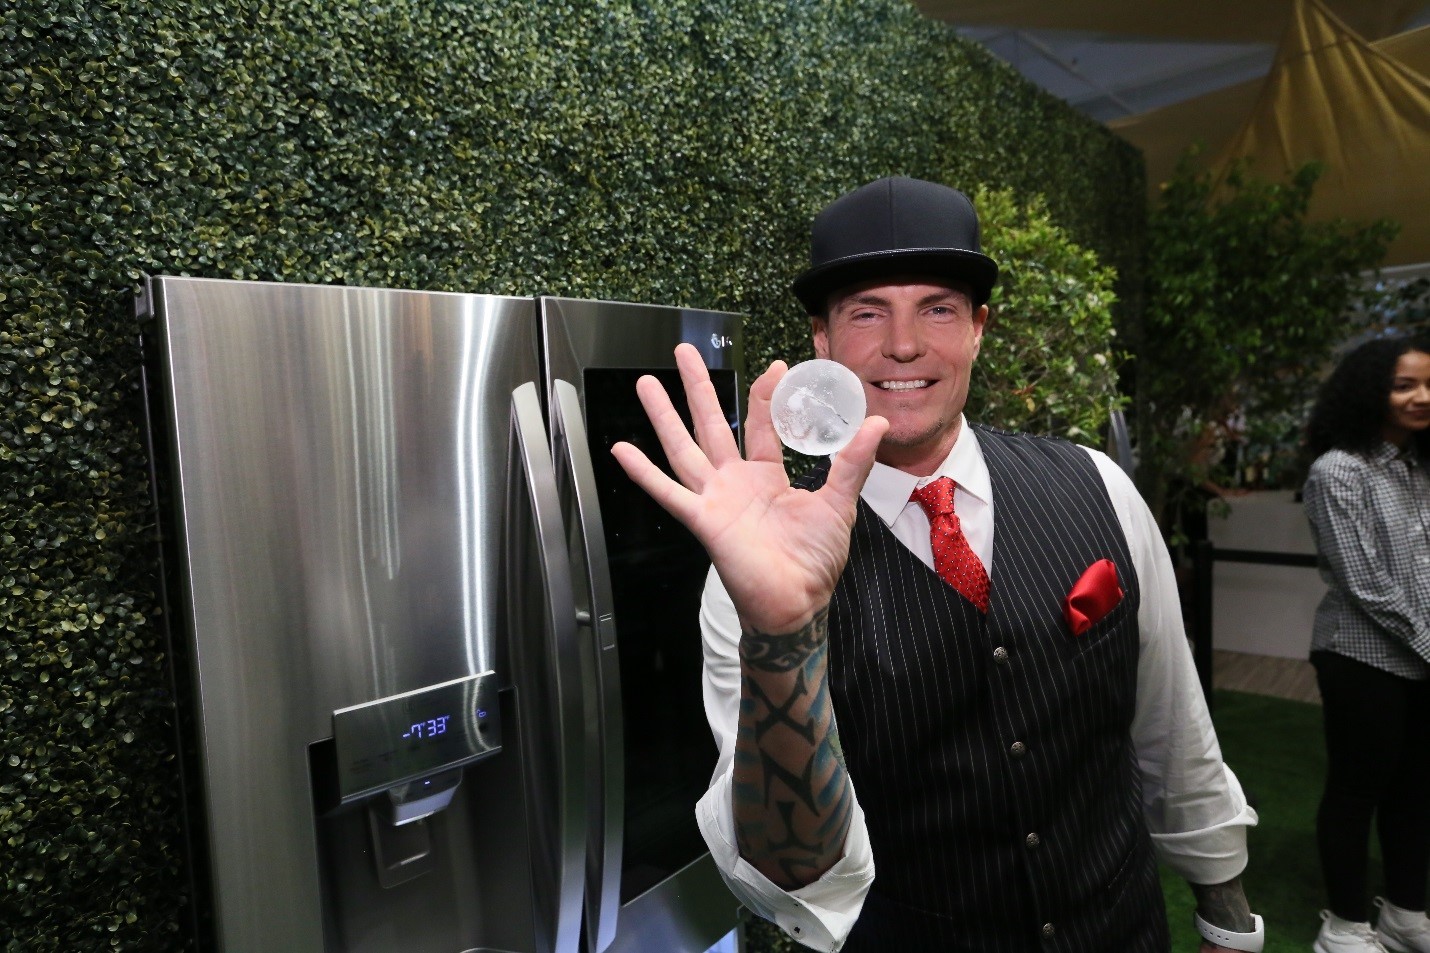 TWO ICONIC ICES HELP INTRODUCE WORLD'S FIRST CRAFT ICE REFRIGERATOR FROM  LG